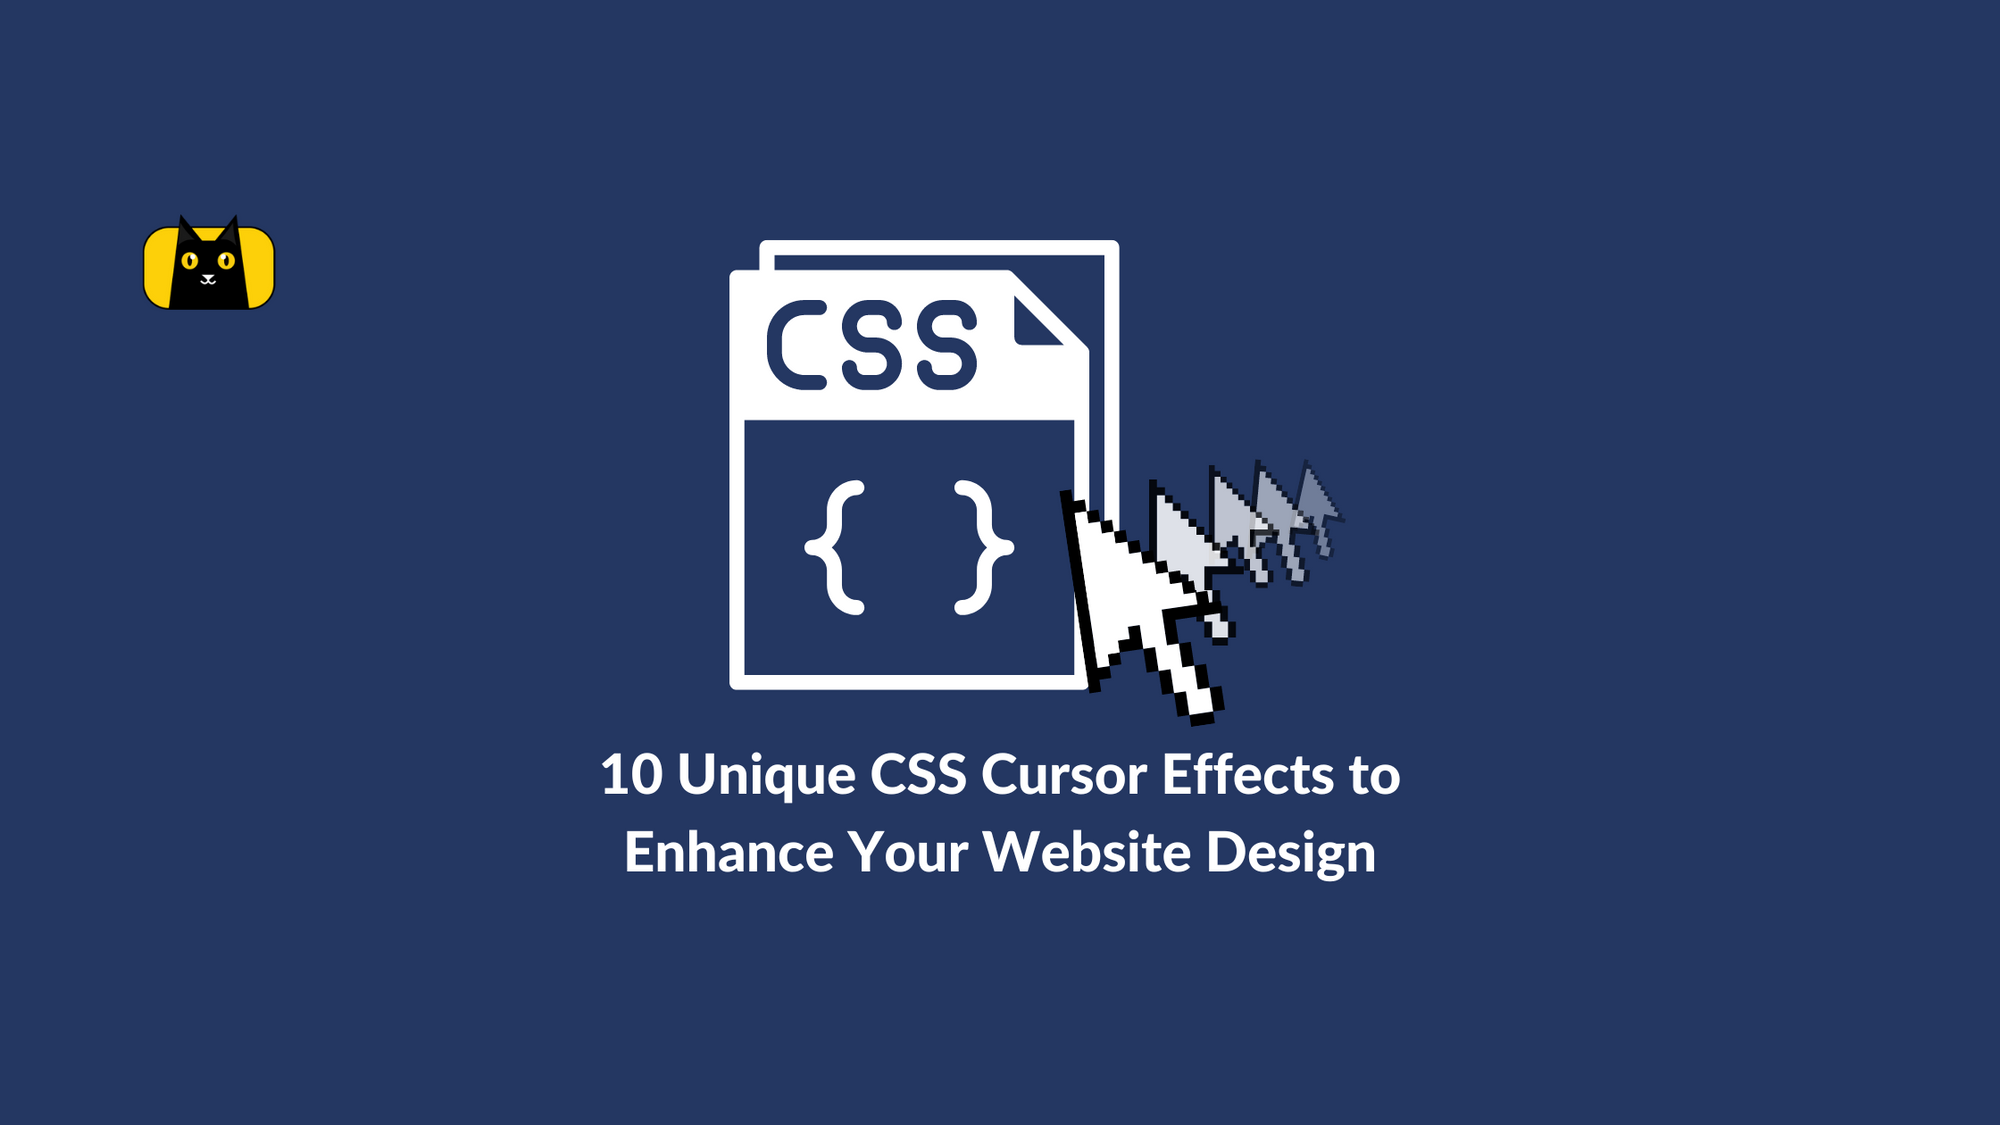 An Introduction to Custom Cursors in Web Design: Tips, Ideas + Tutorials